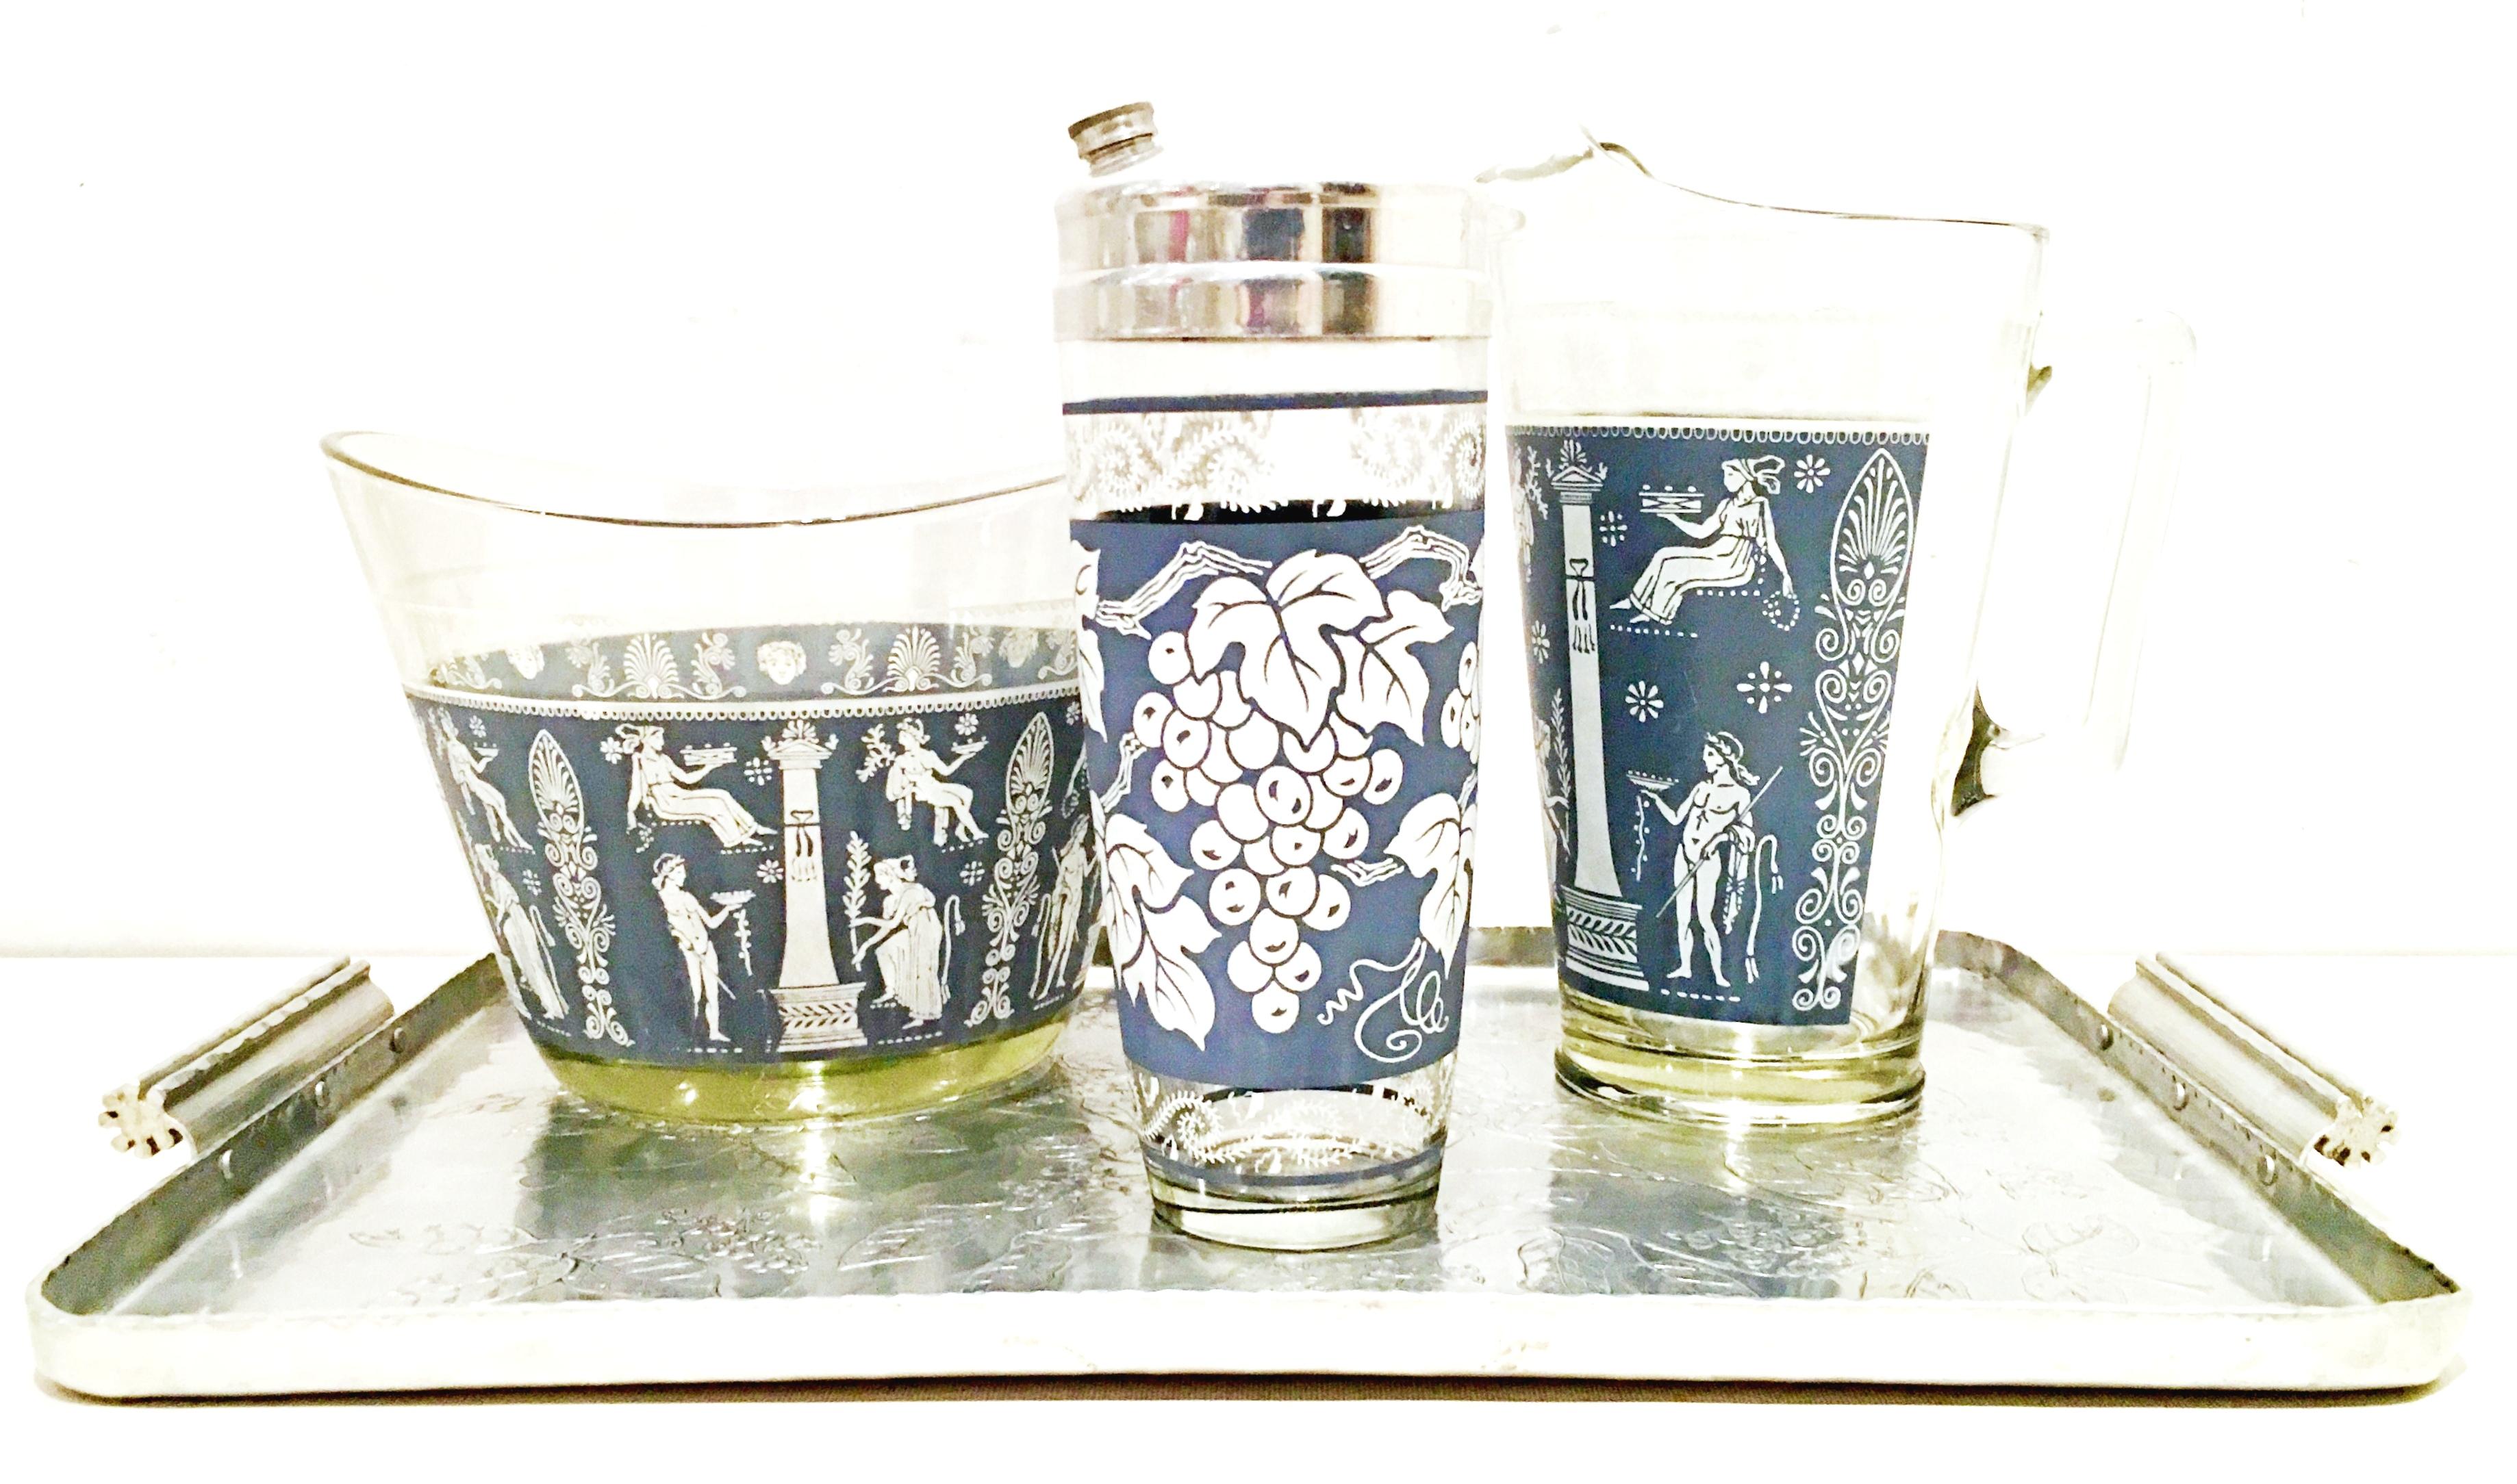 Mid-20th century American printed glass & silver hammered tray drinks, set of 4. This 4-piece set includes, 1 silver rectangular tray, 1 glass pitcher, 1 glass and chrome 3 piece cocktail shaker and oval shaped glass champagne or ice bucket. The